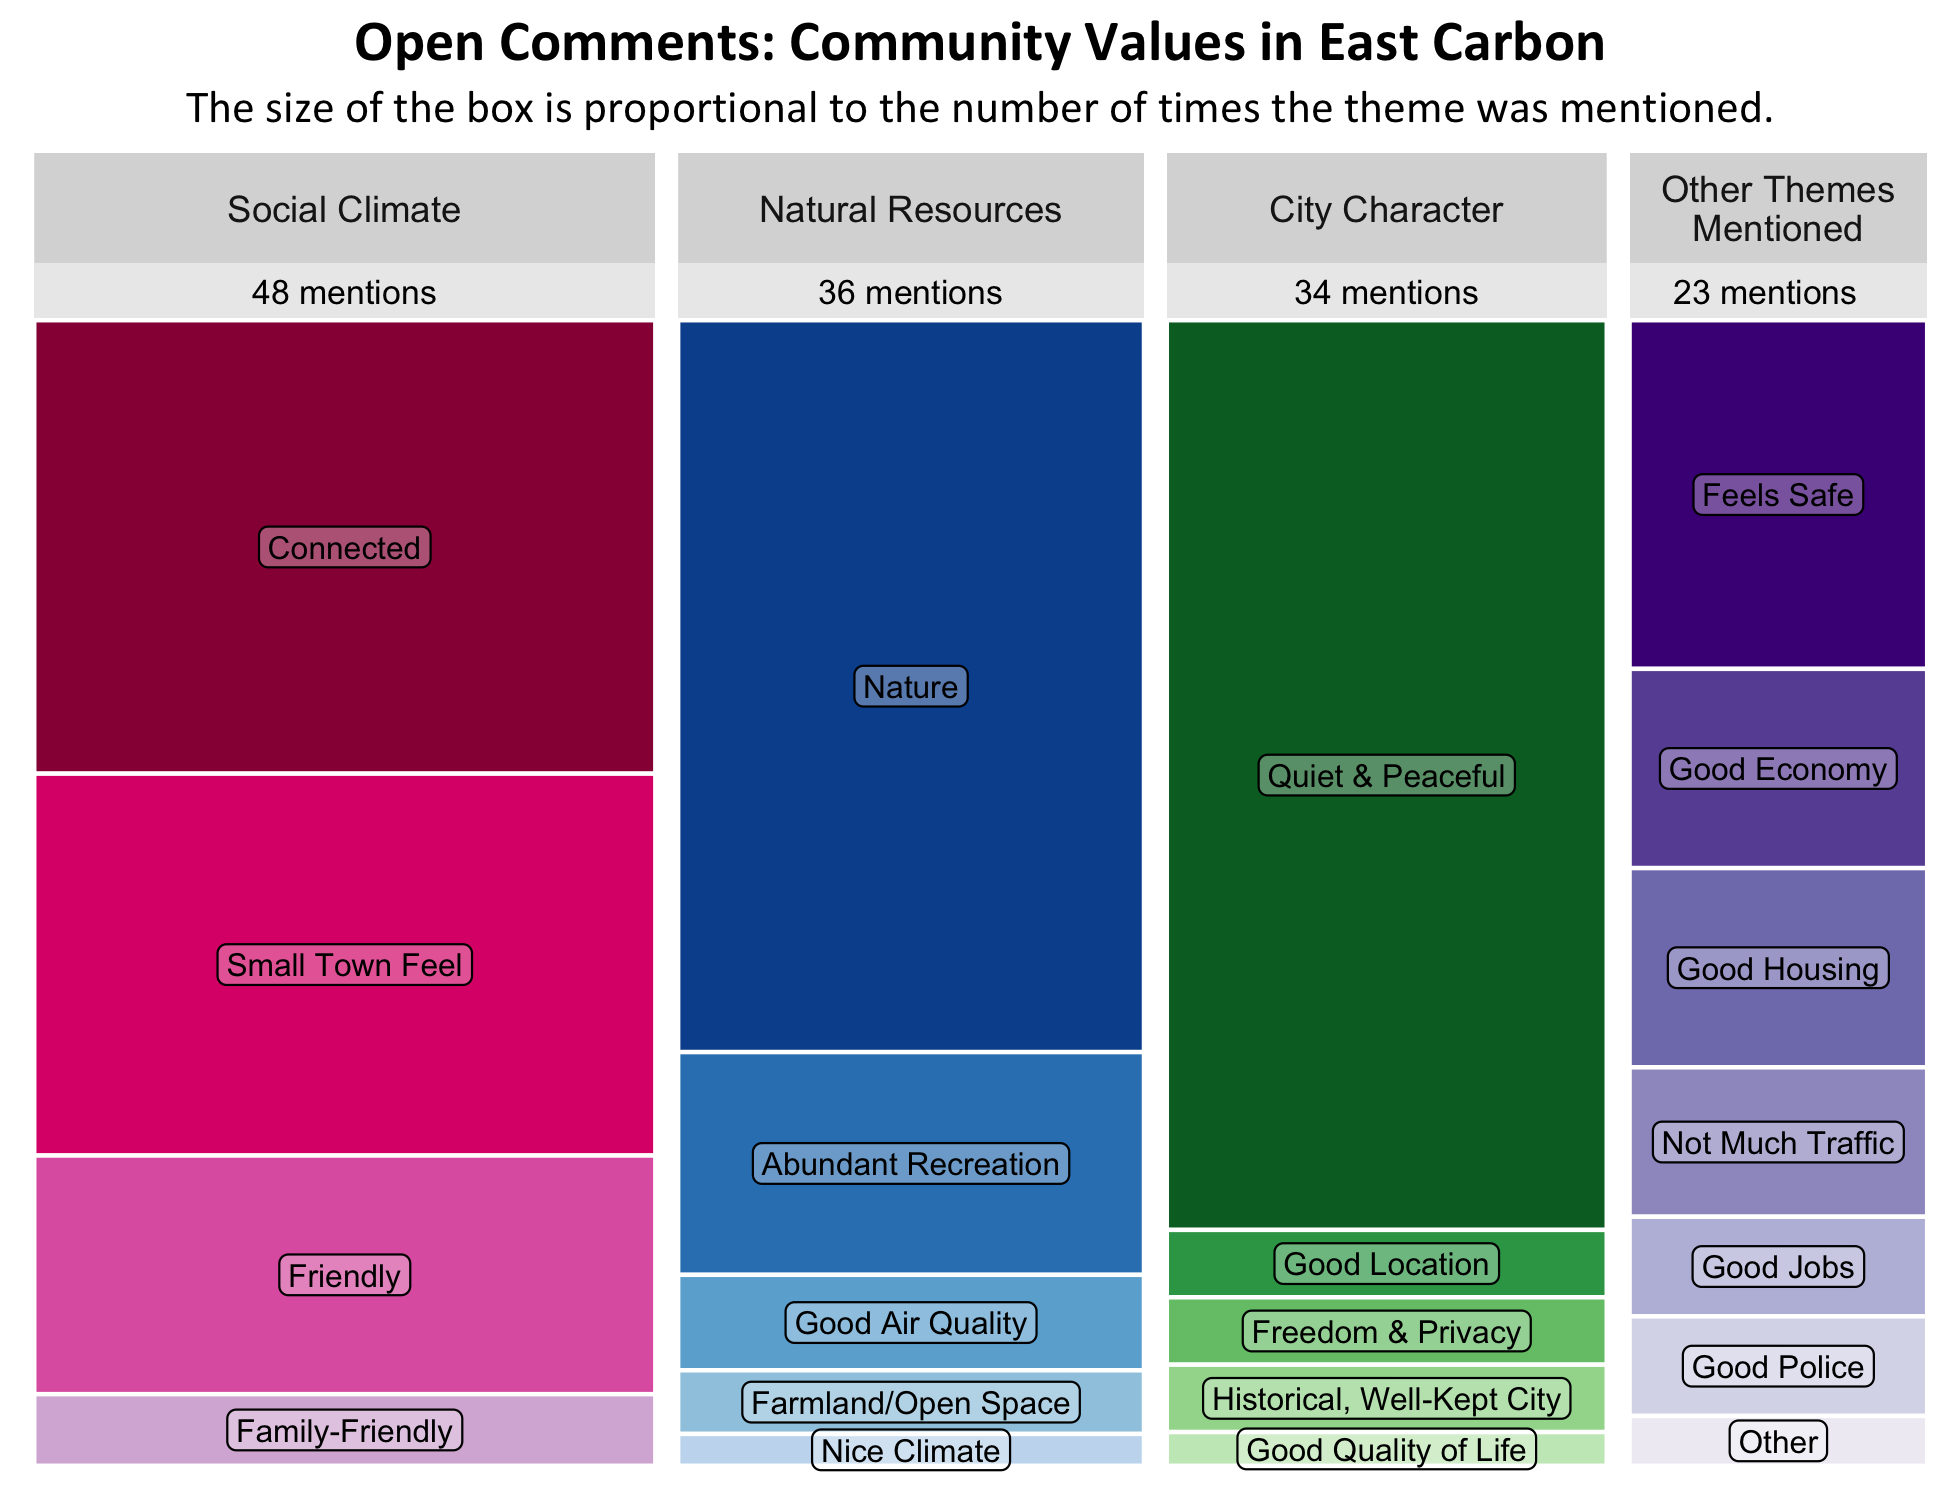 Type: Treemap Chart. Title: Open Comments: Community Values in East Draper. Subtitle: The size of the box is proportional to the number of times the theme was mentioned. Data –; Category: Social Climate- 48 mentions, boxes largest to smallest include Connected, Small Town Feel,  Friendly, family-friendly;  Category: City Character- 34 mentions, boxes largest to smallest include Quiet and Peaceful, Good Location, Freedom and Privacy, Historical/Well-Kept City, Good Quality of life ; Category: Natural Resources- 36 mentions, boxes largest to smallest include Nature, Abundant Recreation, Good Air Quality, Farmland/Open Space, Nice Climate;  Category: Other Themes Mentioned- 23 mentions, boxes largest to smallest include Feels safe, Good Economy,  Good Housing, Not much traffic, Good Jobs, Good Police, Other.  